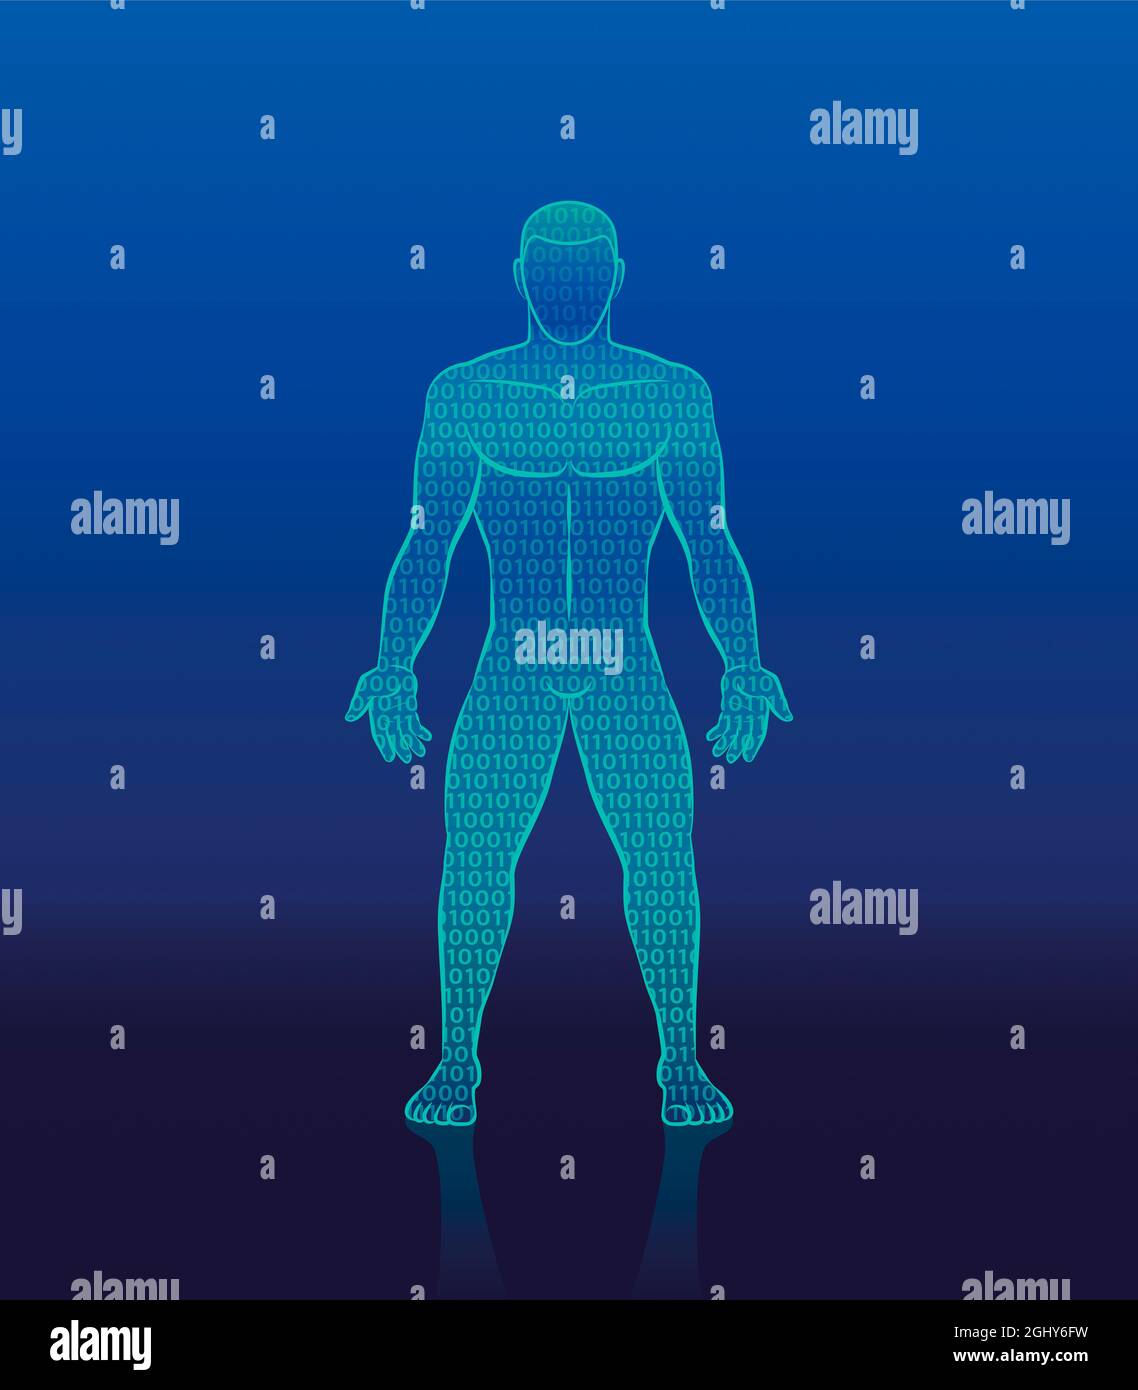 Binary code cyber man - digital human silhouette composed with ones and zeros - symbol for artificial intelligence, cybernetics, bionics robotics. Stock Photo